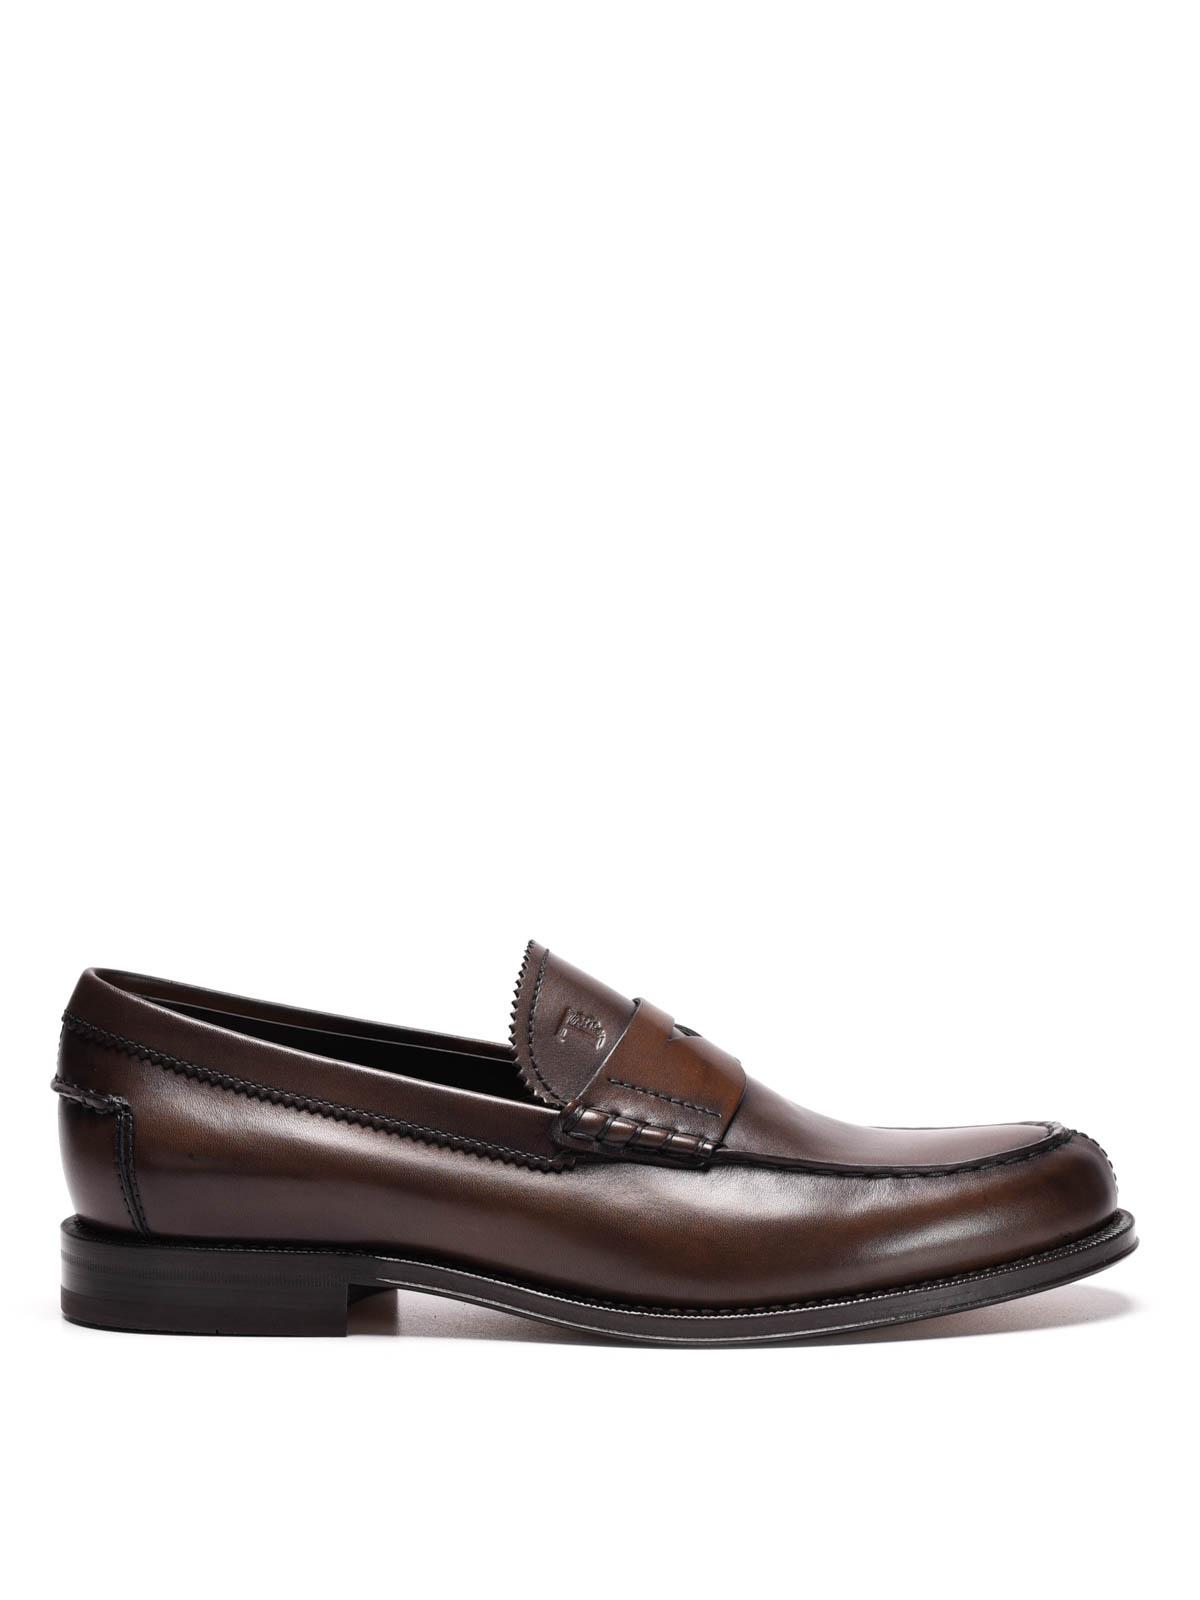 Tod's Leather Loafers in Brown for Men - Lyst